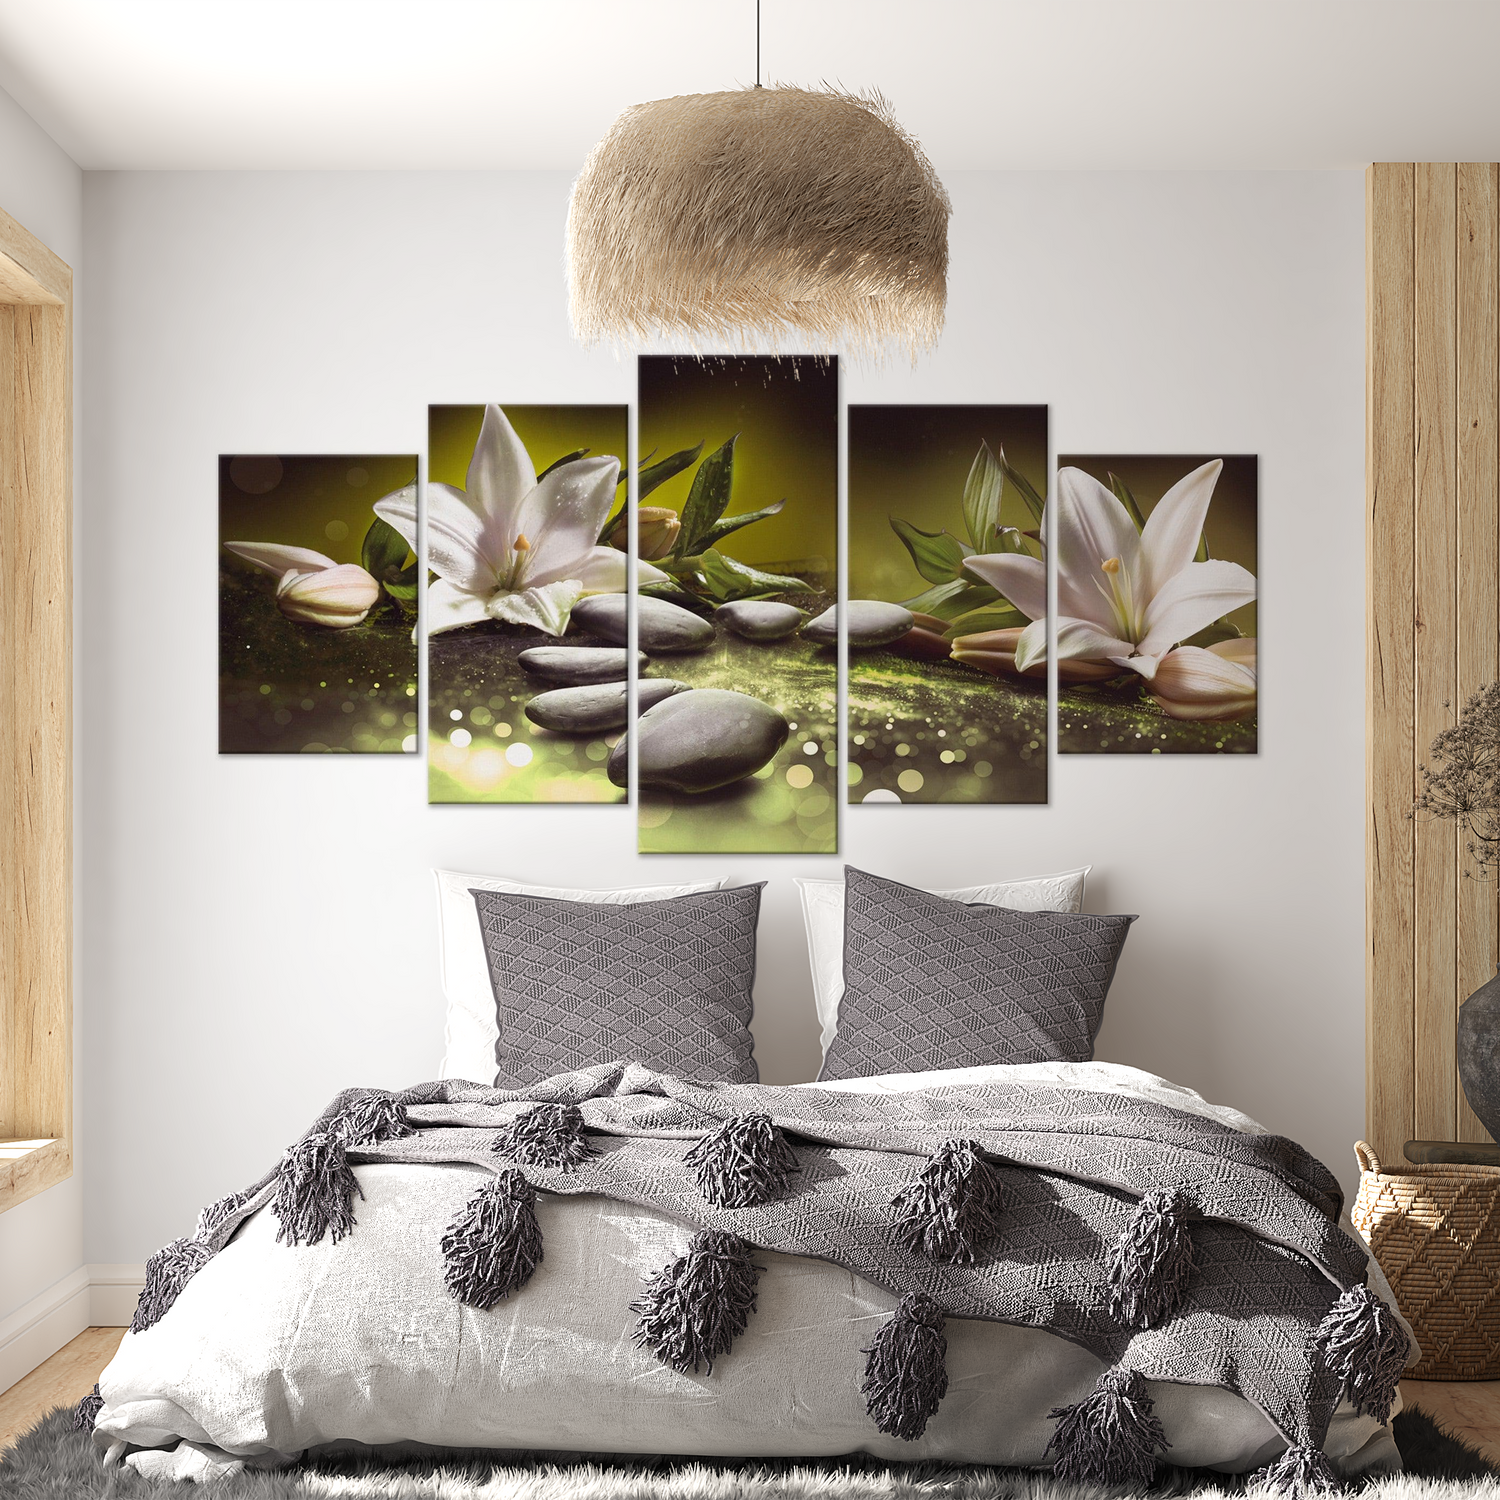 Stretched Canvas Zen Art - Lilies And Stones Green 5 Piece 40"Wx20"H